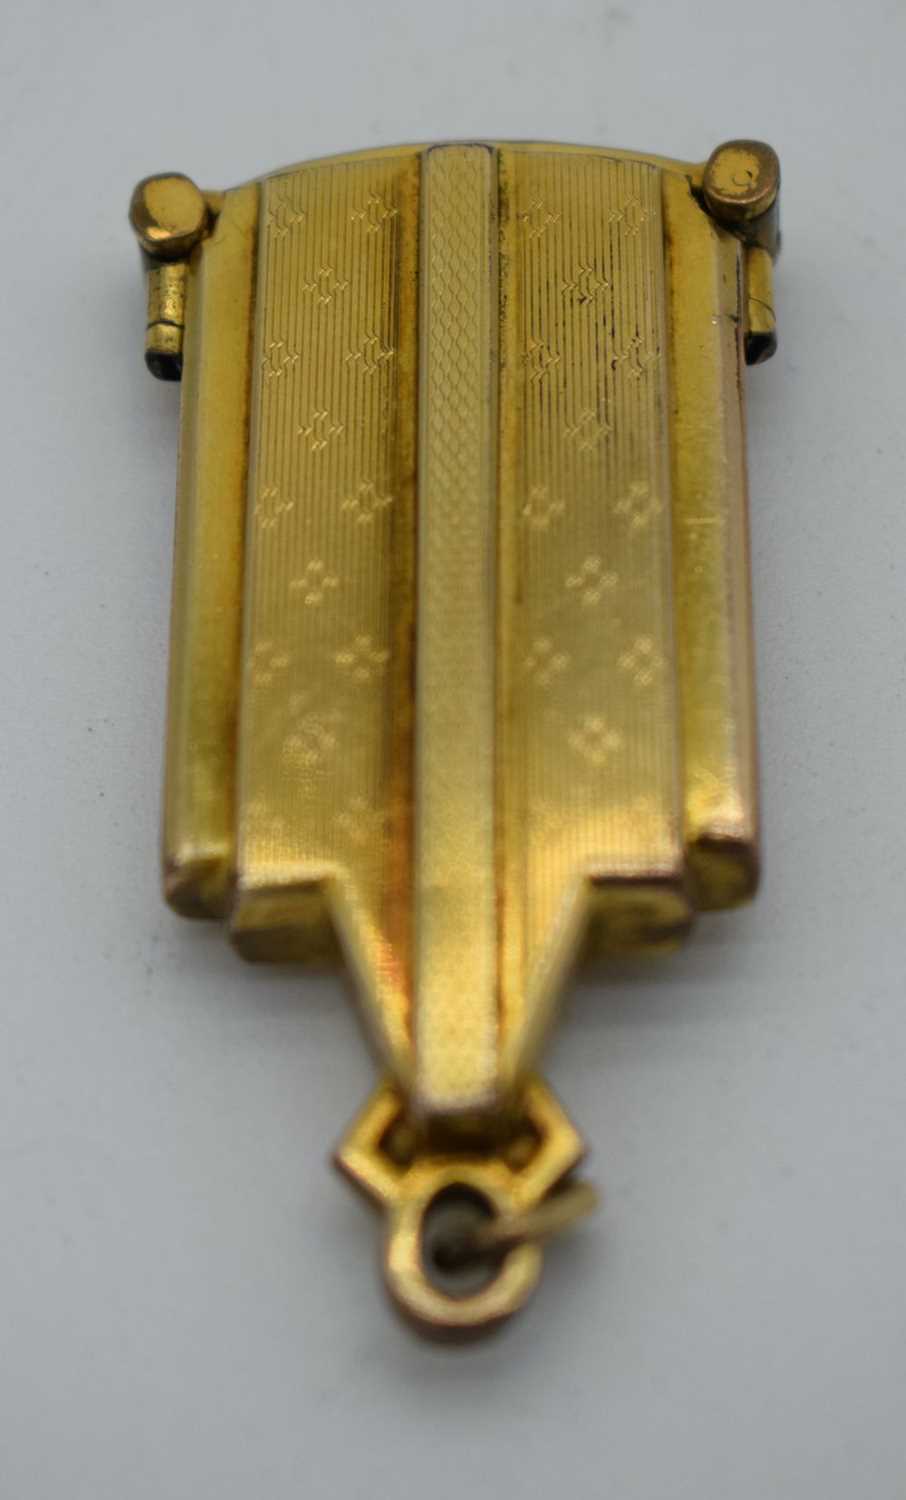 A RARE PAIR OF ANTIQUE YELLOW METAL LORGNETTES. 26 grams. 9.5 cm x 6.5 cm extended. - Image 3 of 3